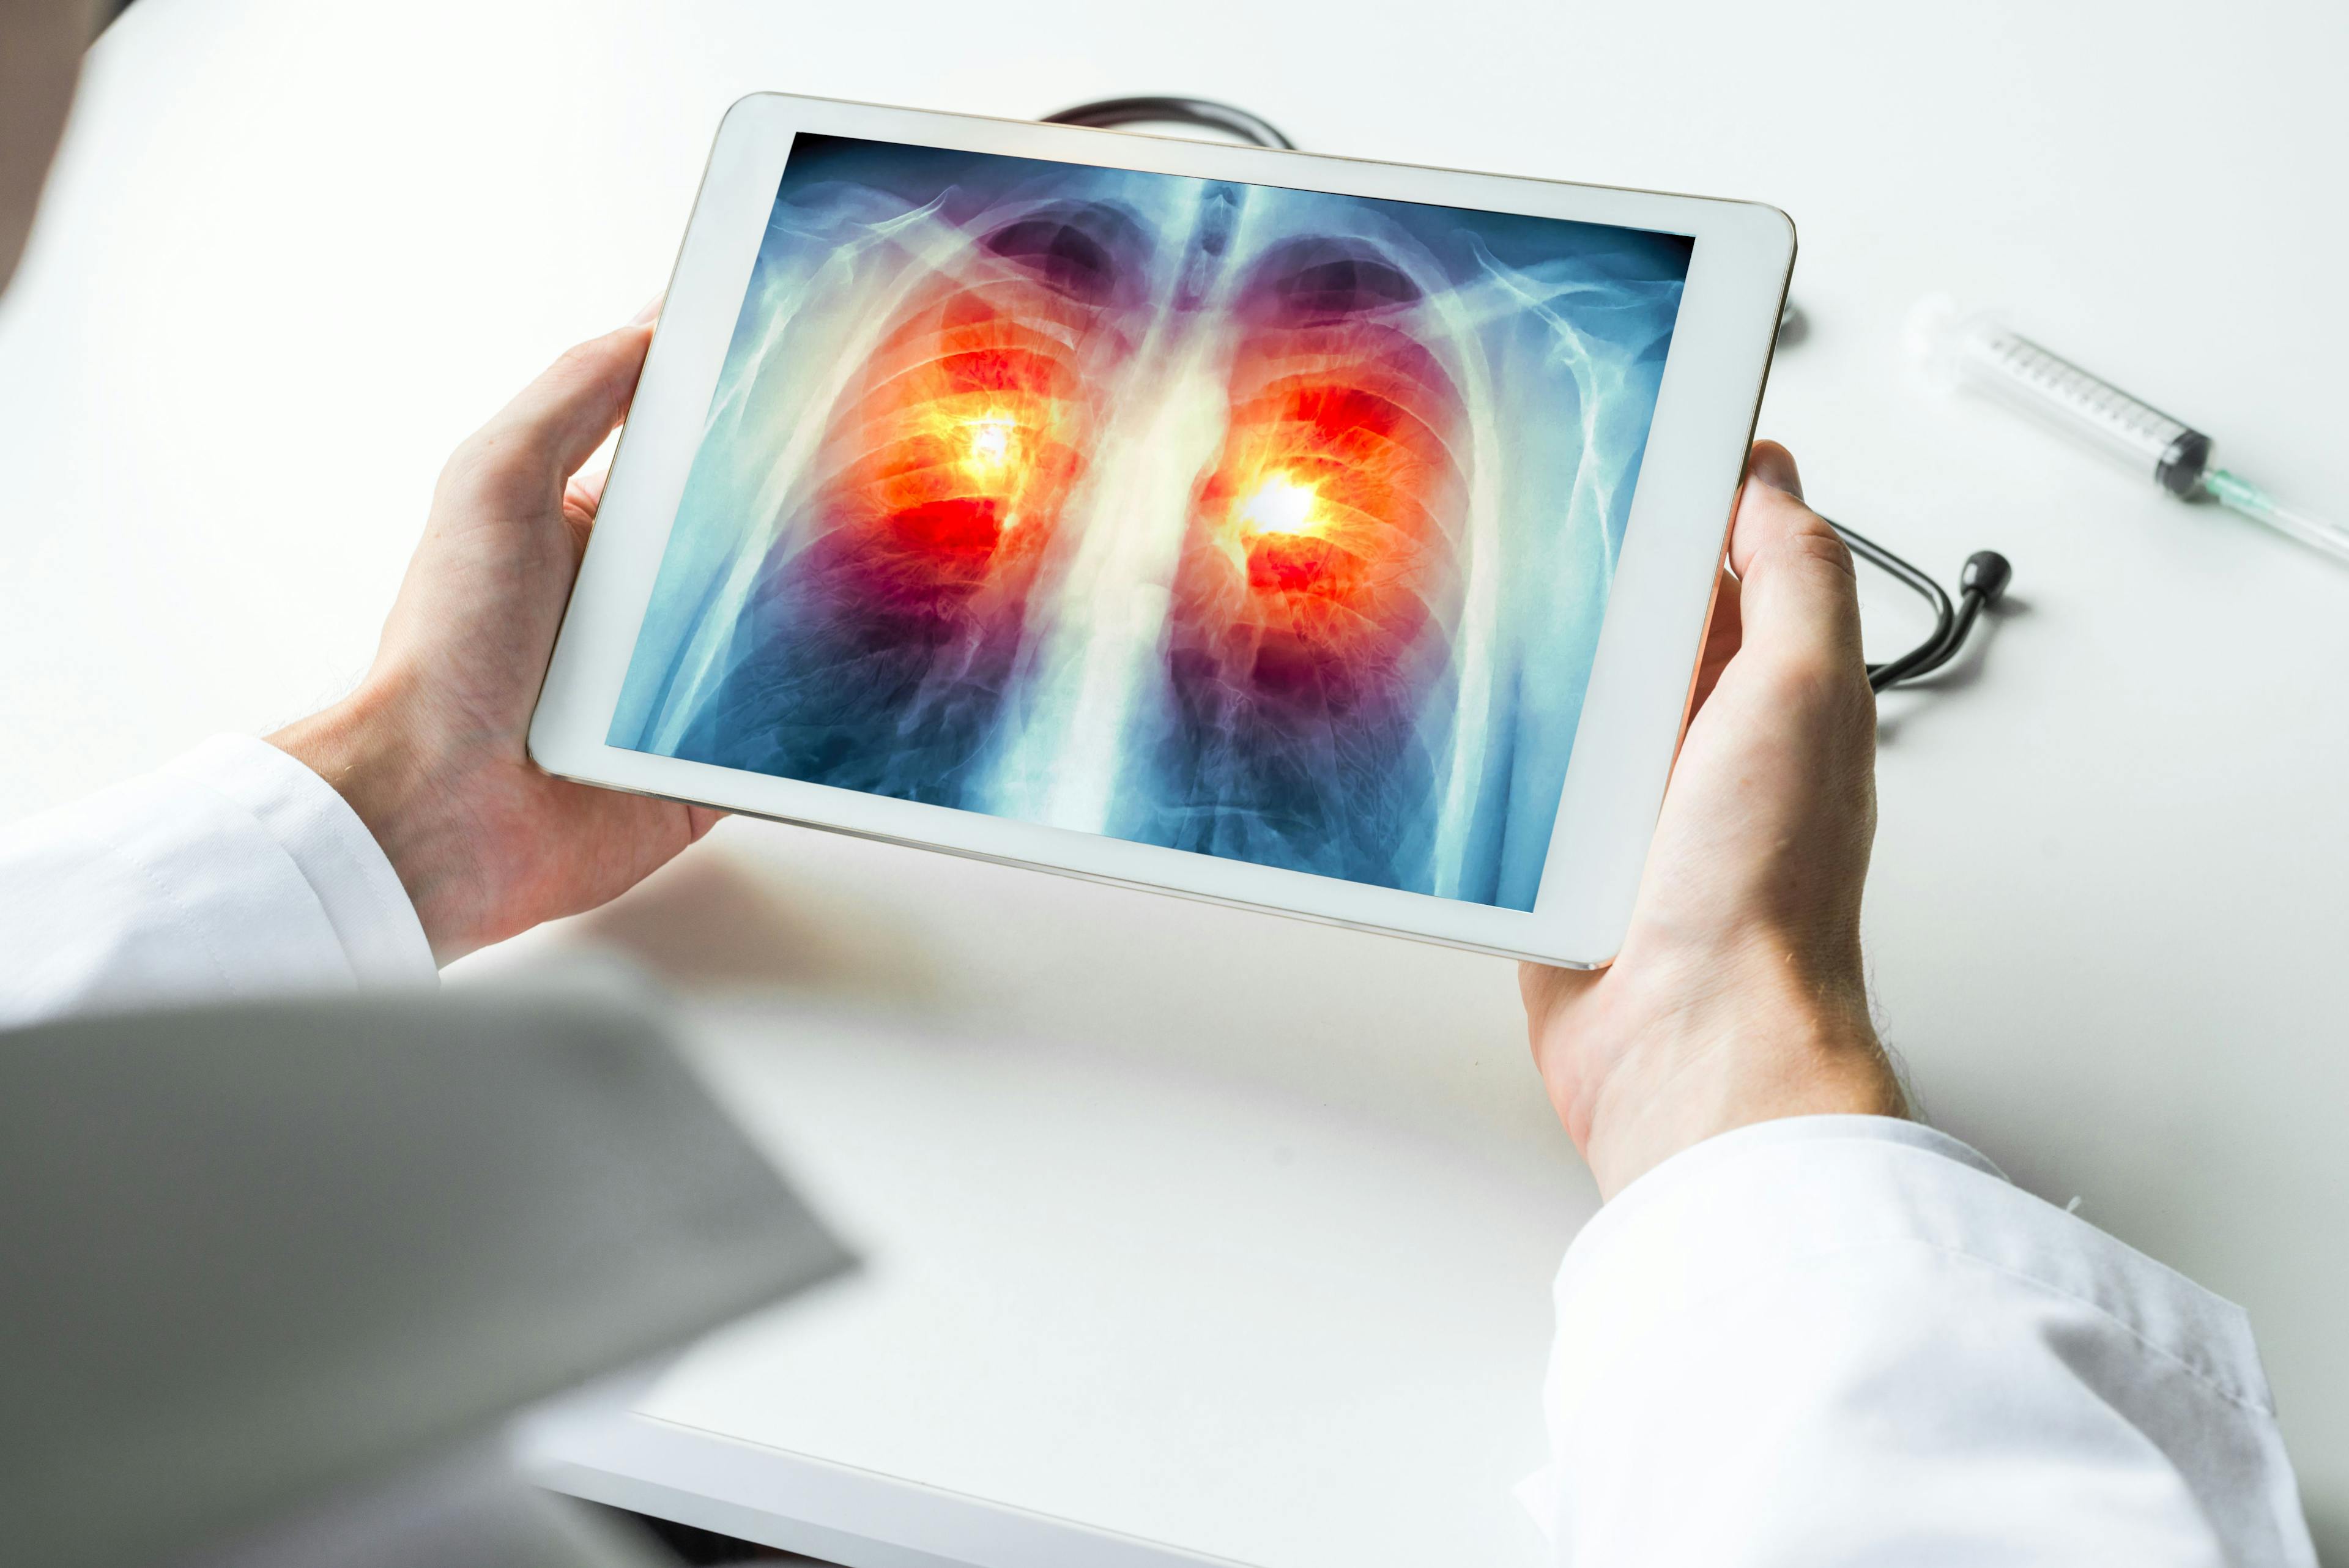 Doctor watching a xray of lung cancer on digital tablet. Radiology concept- Image credit: Steph photographies | stock.adobe.com